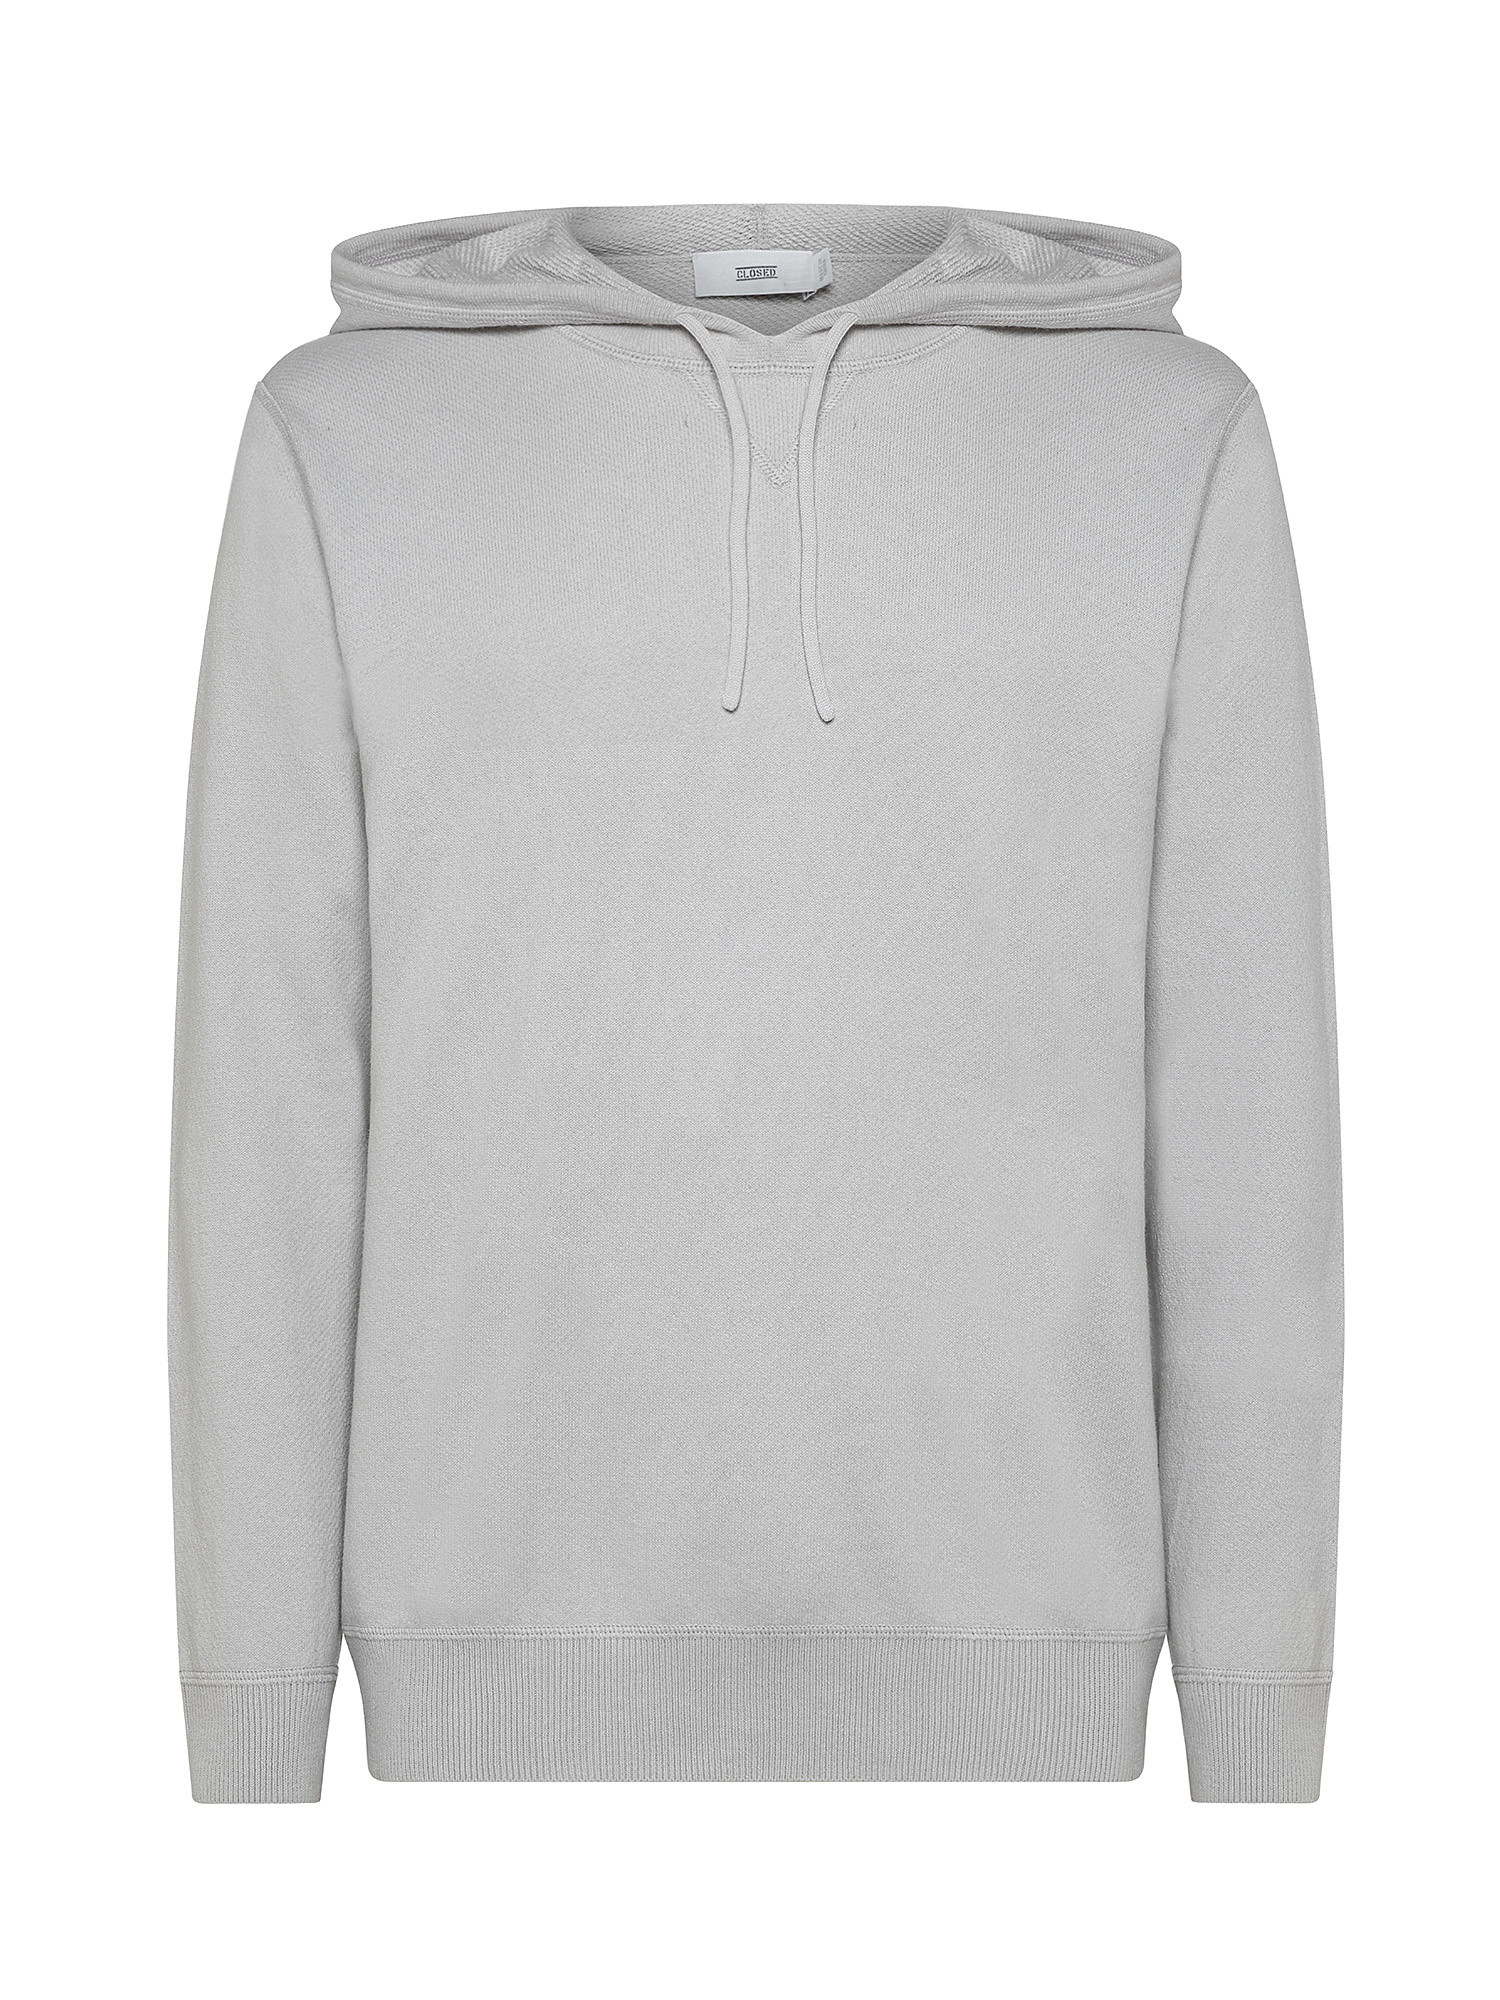 Hooded sweatshirt in cashmere knit, Ice White, large image number 0